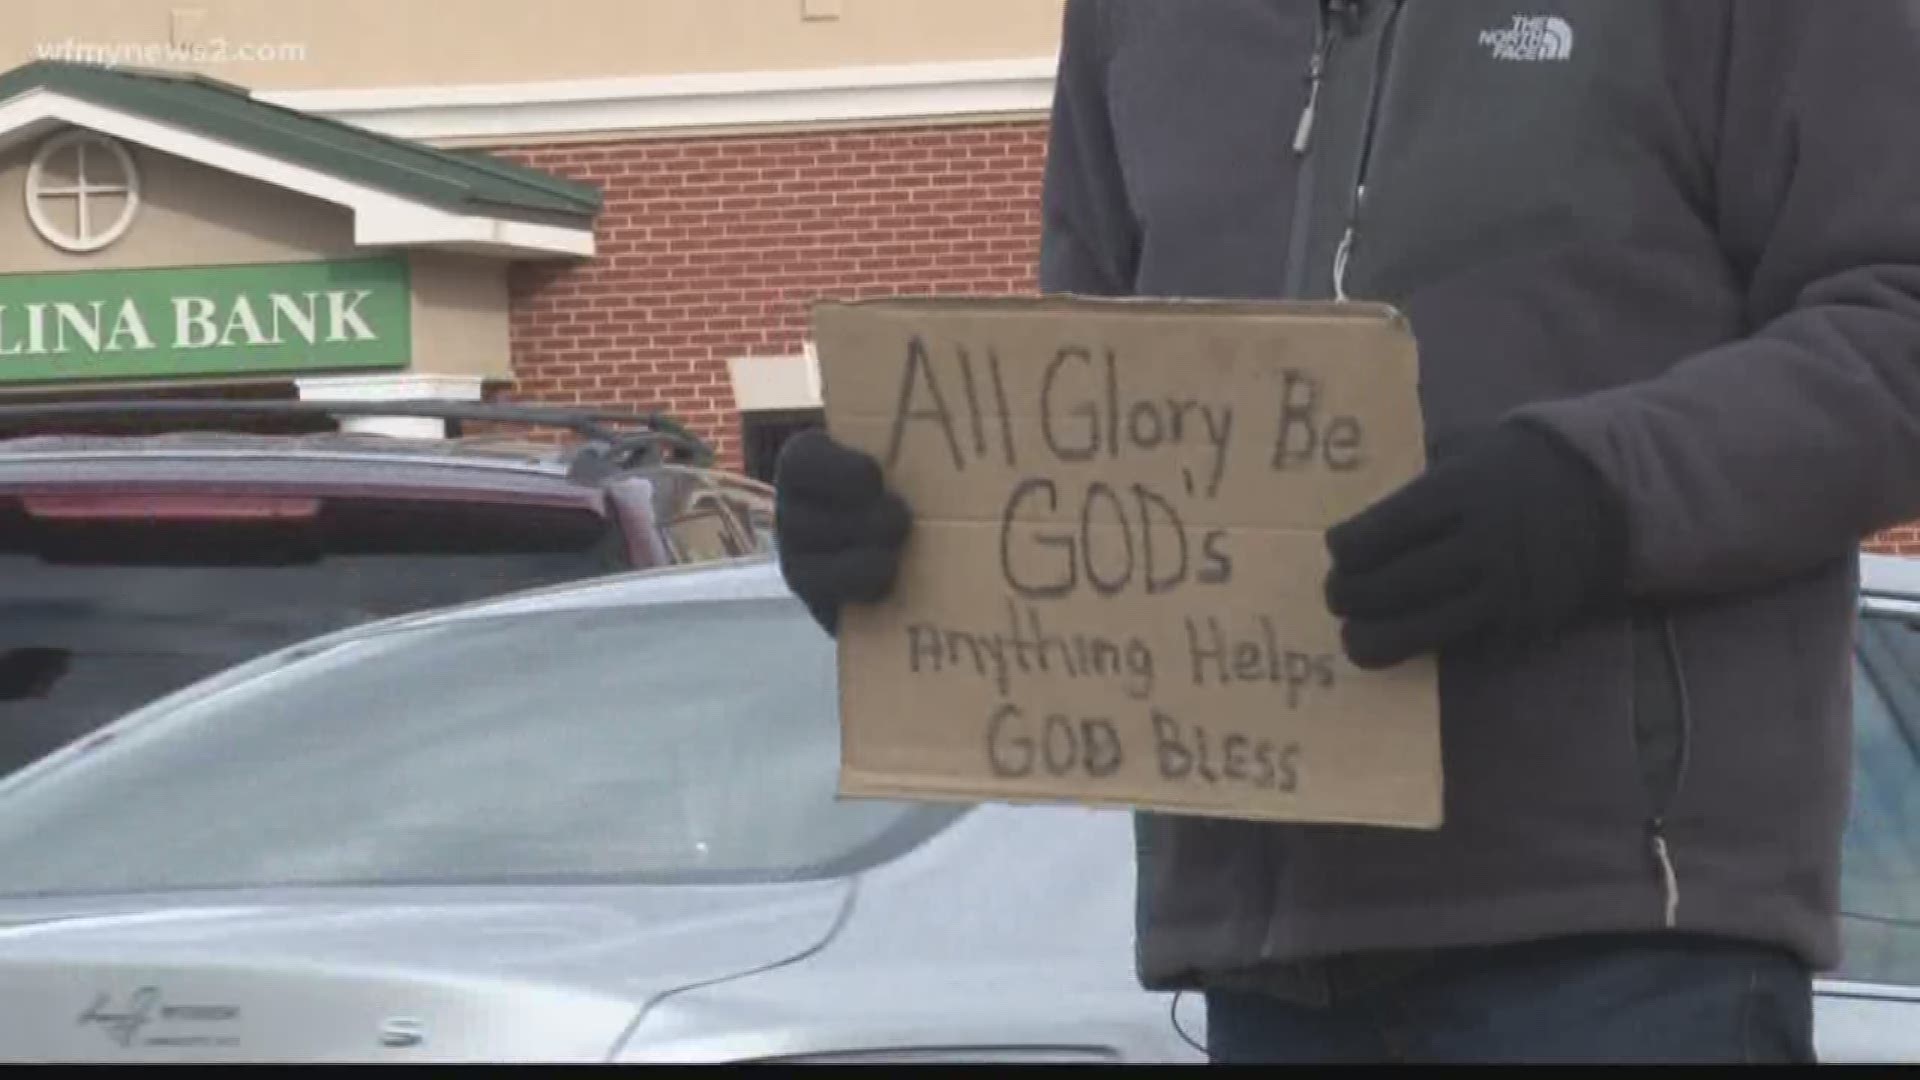 Changes in panhandling rules in the city of Greesnboro